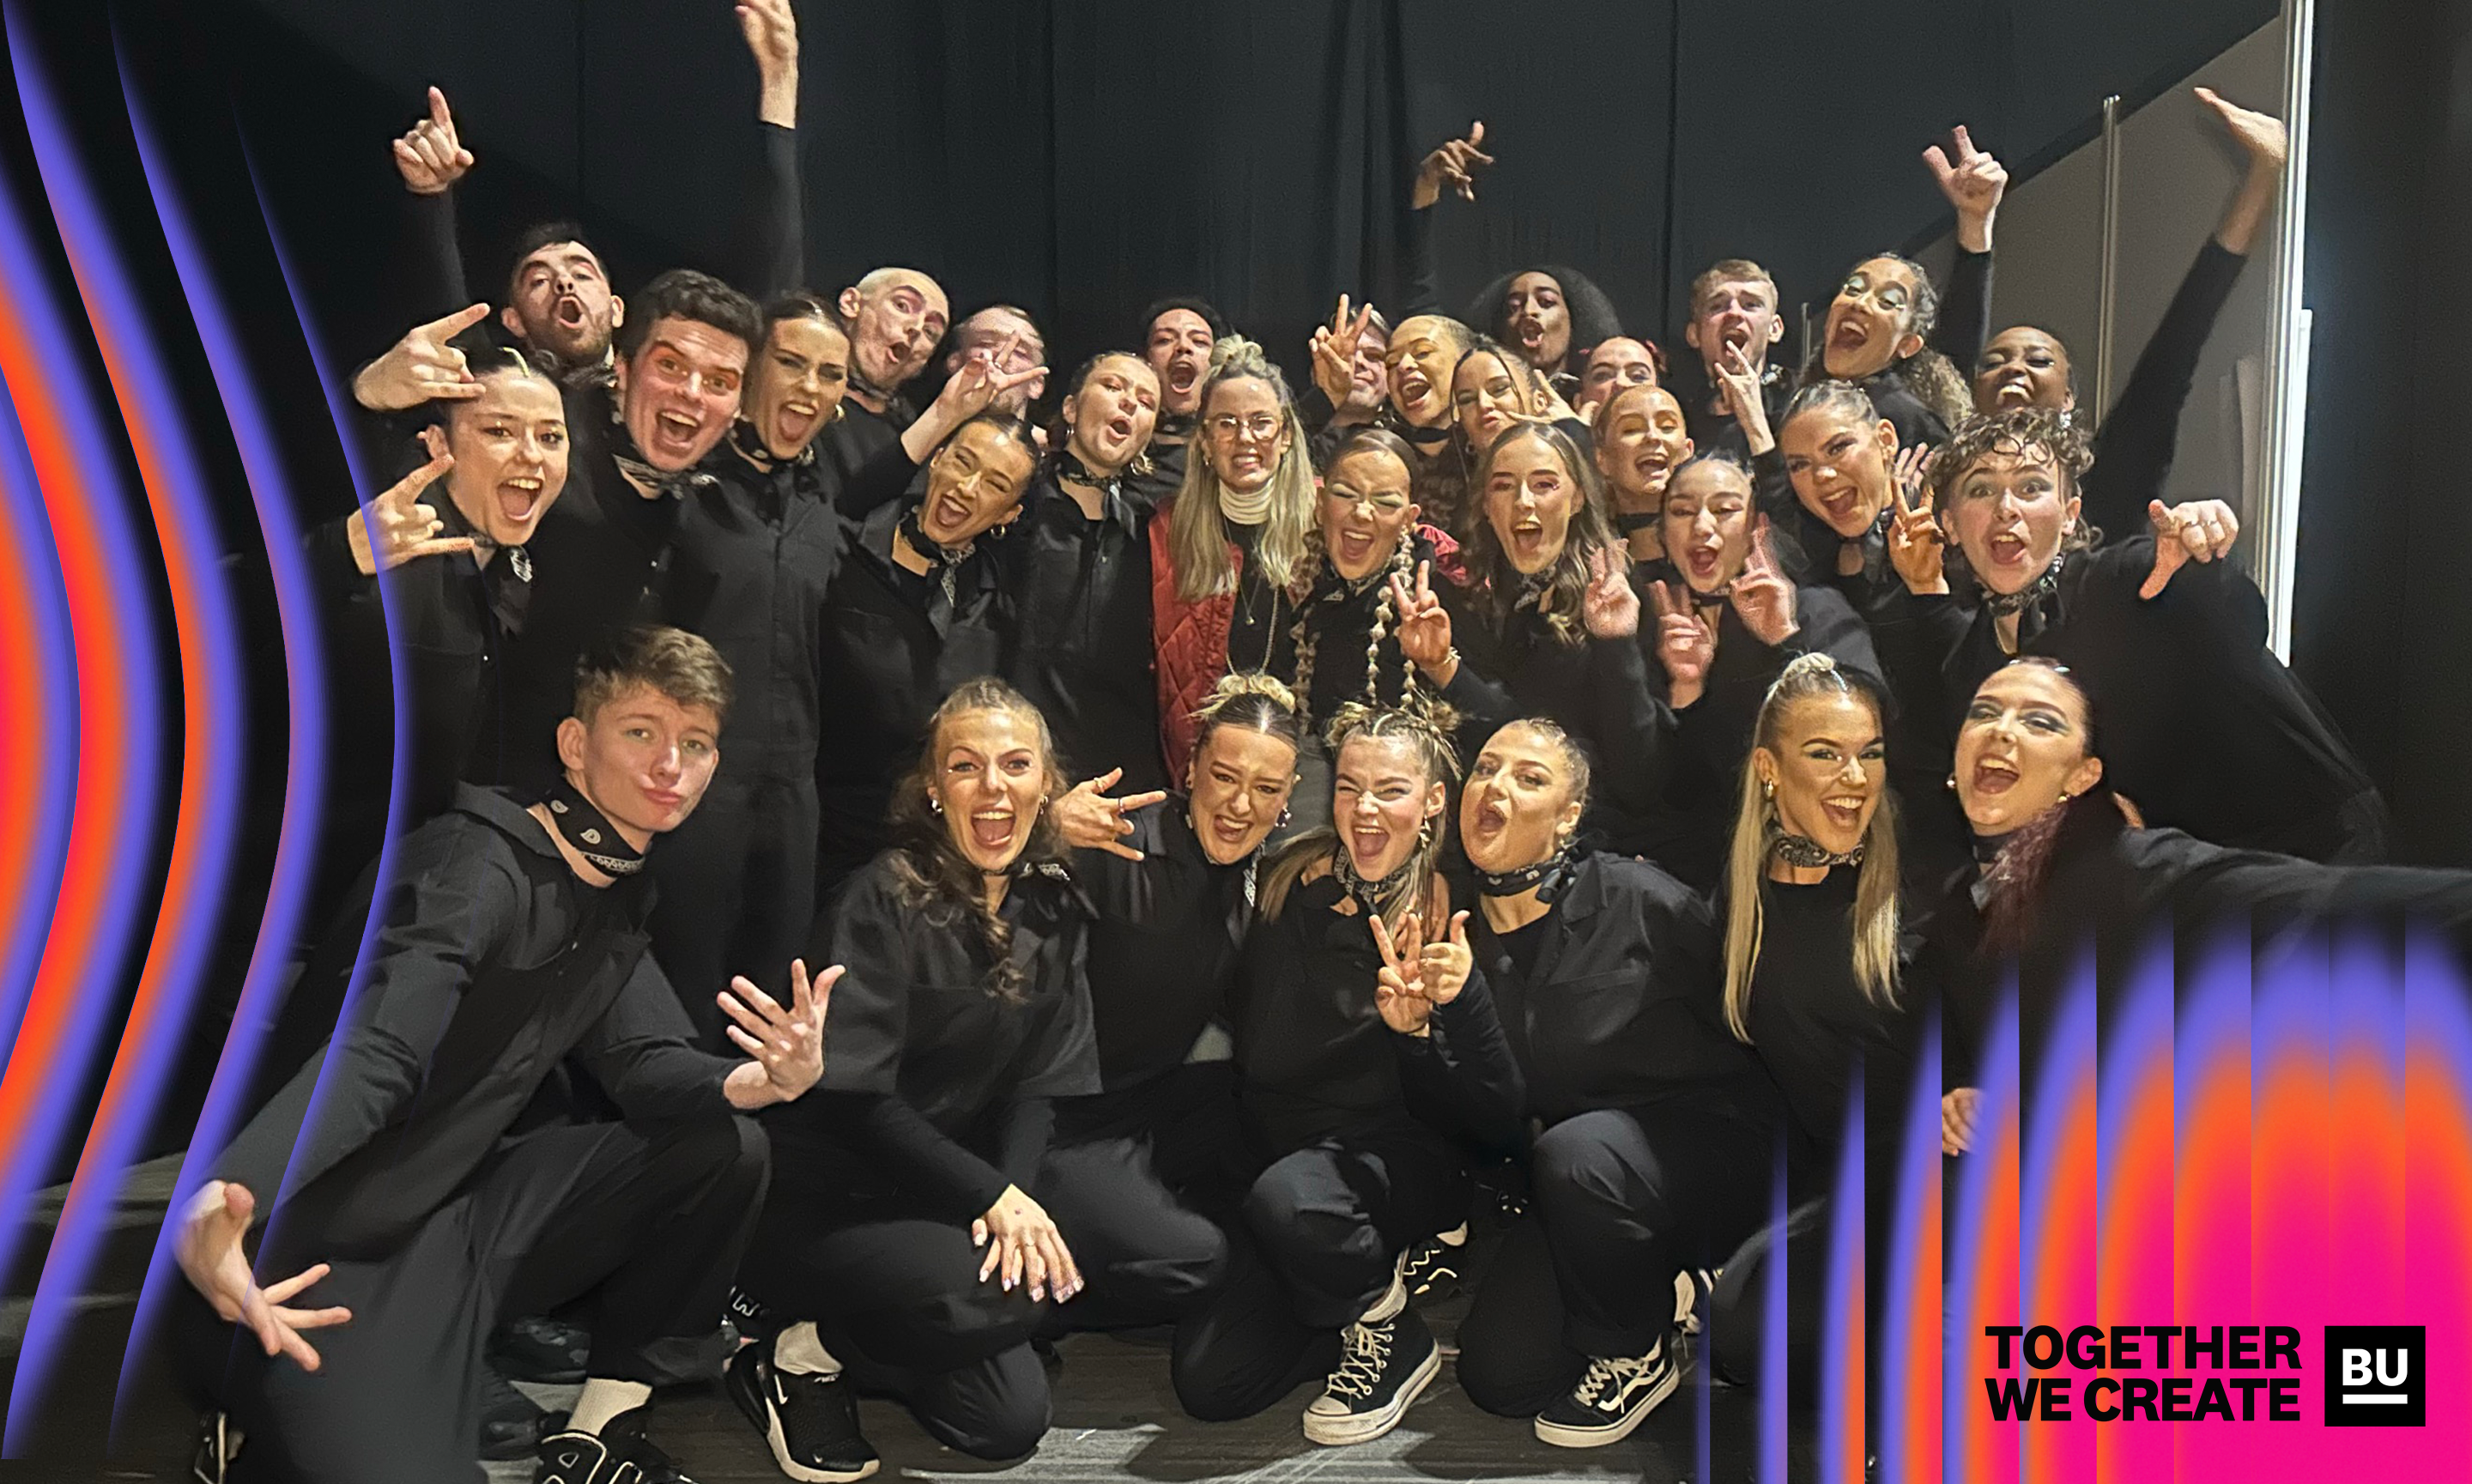 Essex and Birmingham Students pose together backstage at Move IT